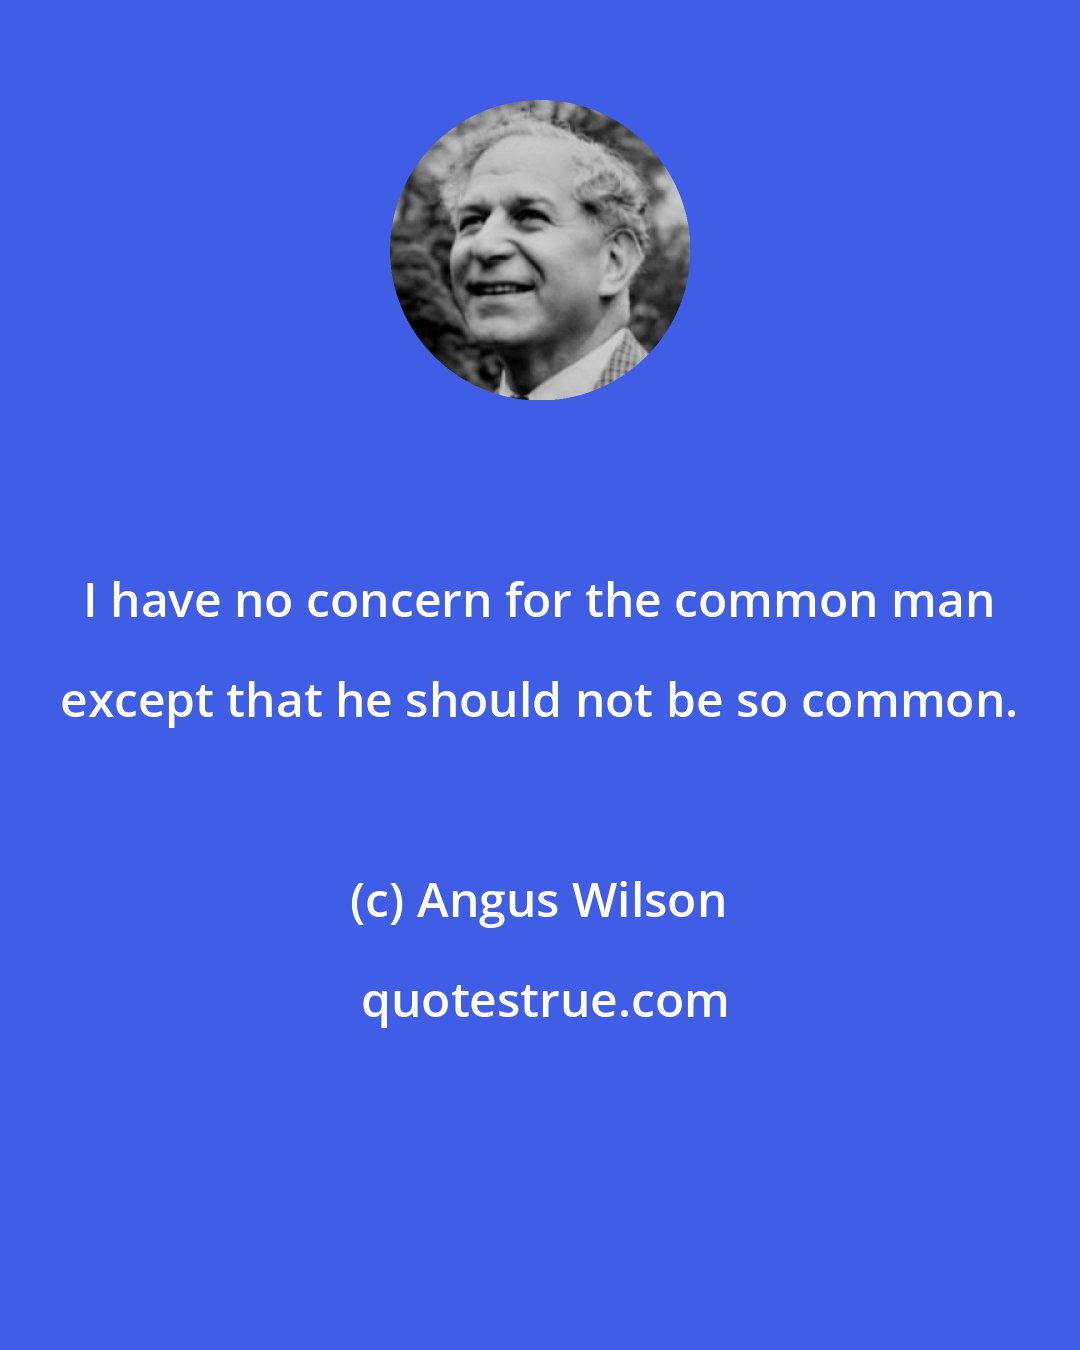 Angus Wilson: I have no concern for the common man except that he should not be so common.